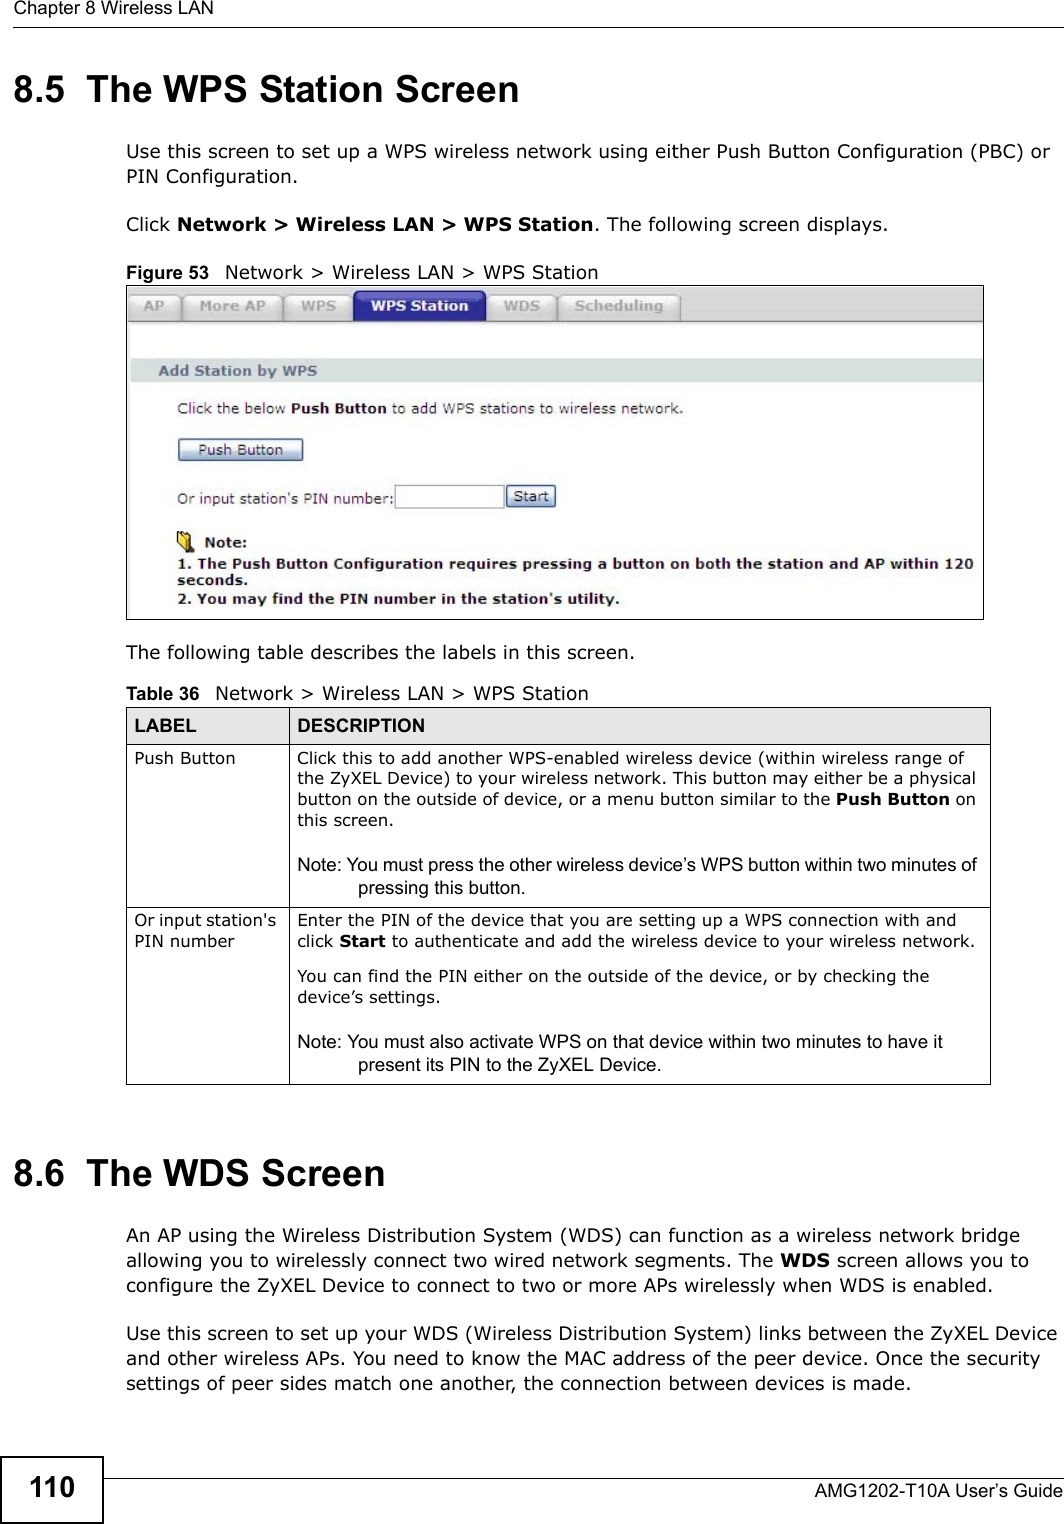 Chapter 8 Wireless LANAMG1202-T10A User’s Guide1108.5  The WPS Station ScreenUse this screen to set up a WPS wireless network using either Push Button Configuration (PBC) or PIN Configuration.Click Network &gt; Wireless LAN &gt; WPS Station. The following screen displays.Figure 53   Network &gt; Wireless LAN &gt; WPS StationThe following table describes the labels in this screen.8.6  The WDS ScreenAn AP using the Wireless Distribution System (WDS) can function as a wireless network bridge allowing you to wirelessly connect two wired network segments. The WDS screen allows you to configure the ZyXEL Device to connect to two or more APs wirelessly when WDS is enabled. Use this screen to set up your WDS (Wireless Distribution System) links between the ZyXEL Device and other wireless APs. You need to know the MAC address of the peer device. Once the security settings of peer sides match one another, the connection between devices is made. Table 36   Network &gt; Wireless LAN &gt; WPS StationLABEL DESCRIPTIONPush Button Click this to add another WPS-enabled wireless device (within wireless range of the ZyXEL Device) to your wireless network. This button may either be a physical button on the outside of device, or a menu button similar to the Push Button on this screen.Note: You must press the other wireless device’s WPS button within two minutes of pressing this button.Or input station&apos;s PIN numberEnter the PIN of the device that you are setting up a WPS connection with and click Start to authenticate and add the wireless device to your wireless network.You can find the PIN either on the outside of the device, or by checking the device’s settings.Note: You must also activate WPS on that device within two minutes to have it present its PIN to the ZyXEL Device.